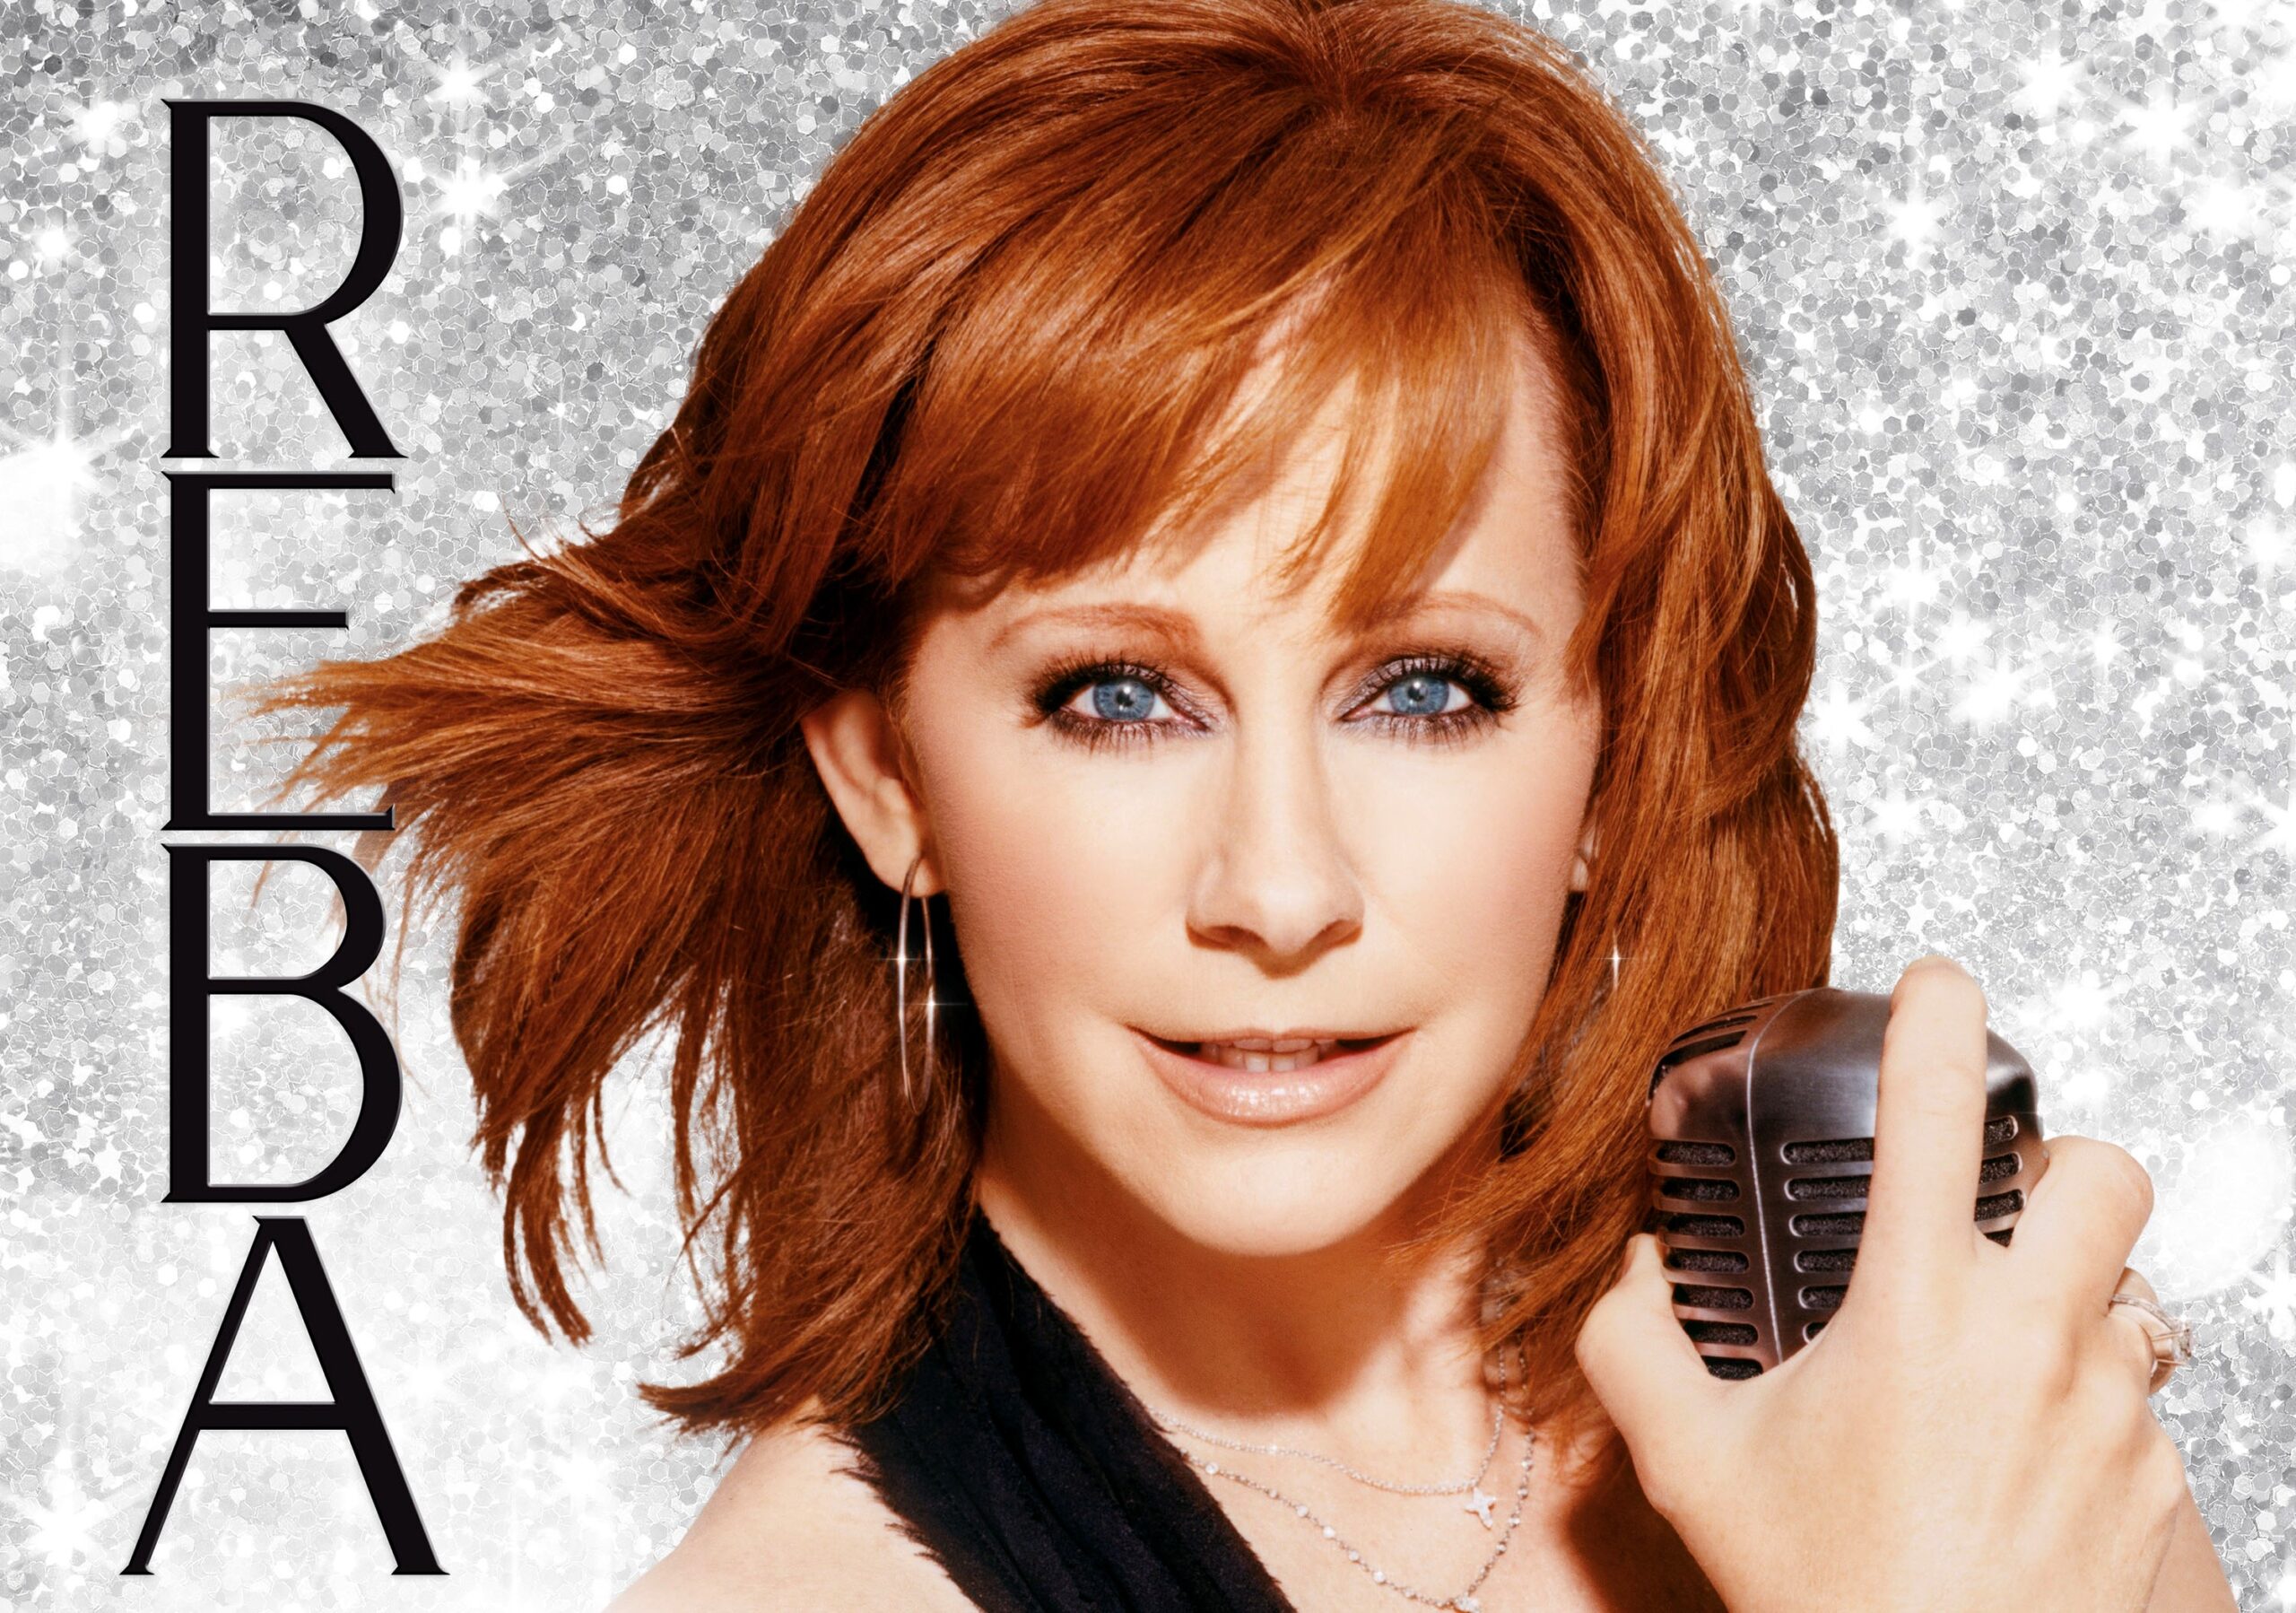 Reba McEntire Revives and Revisits Some of Her Hits with New Three Part Box Set